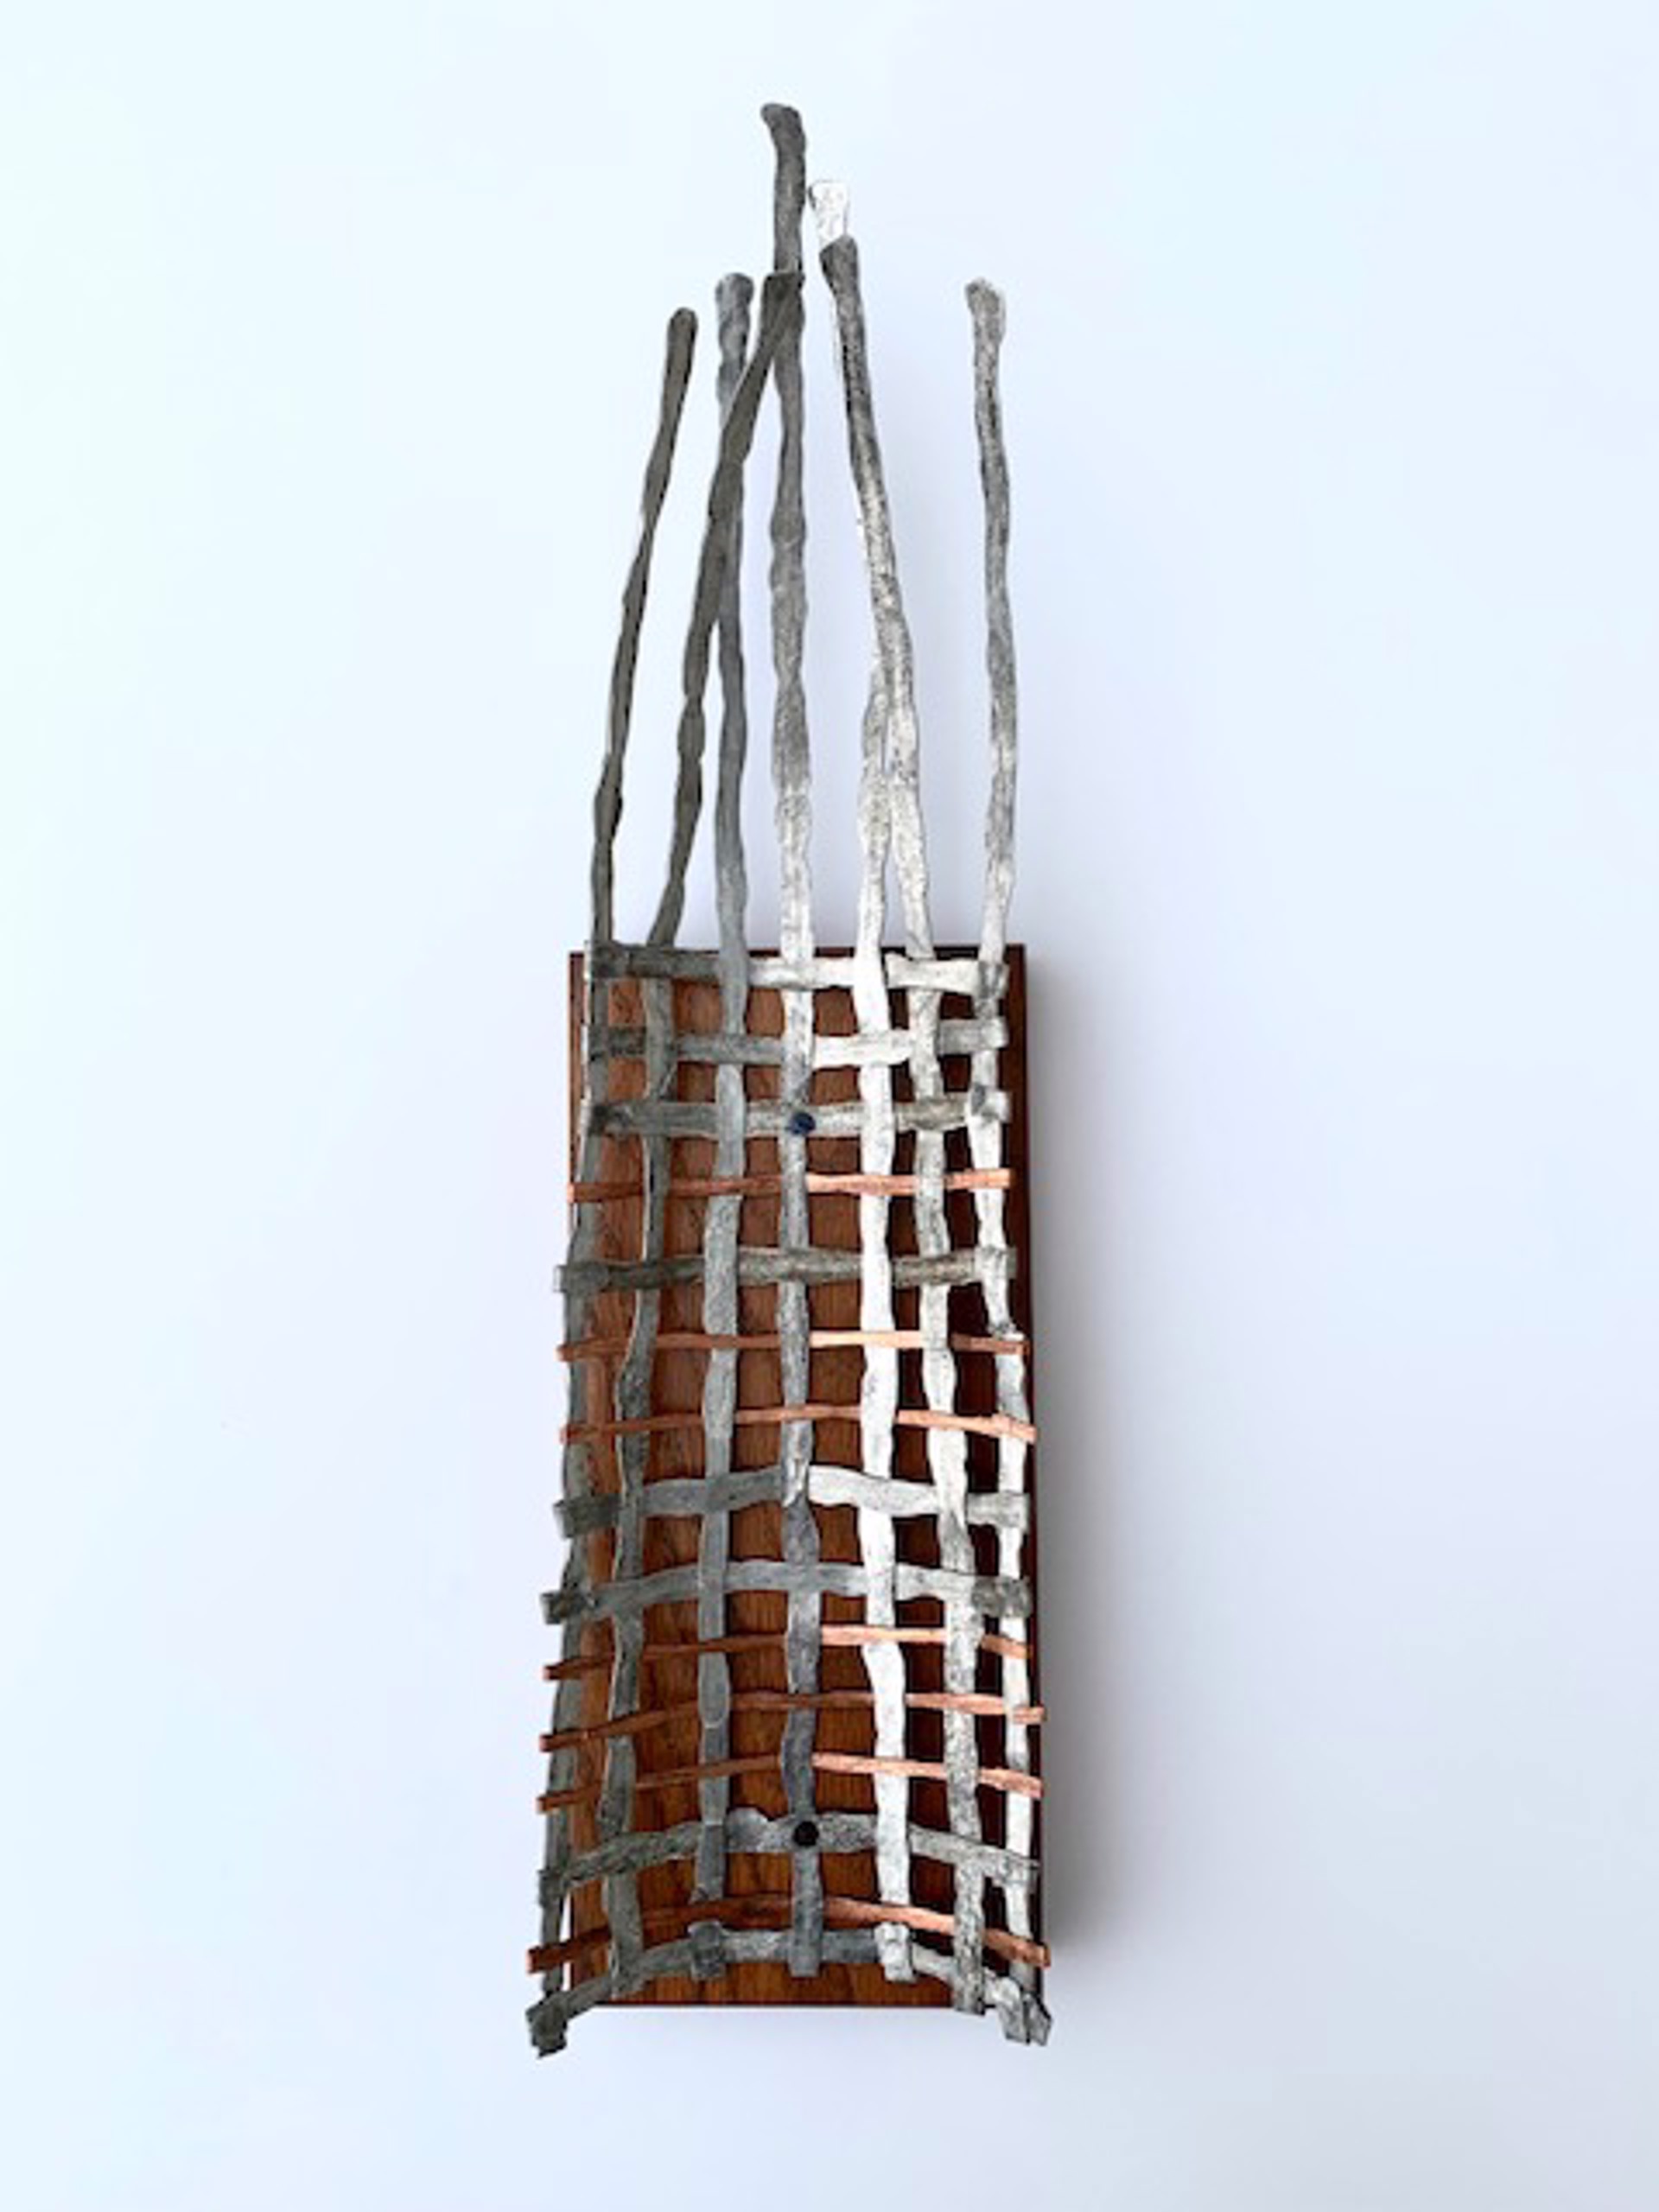 Woven Wire & Metal #131 by Richard Hooton